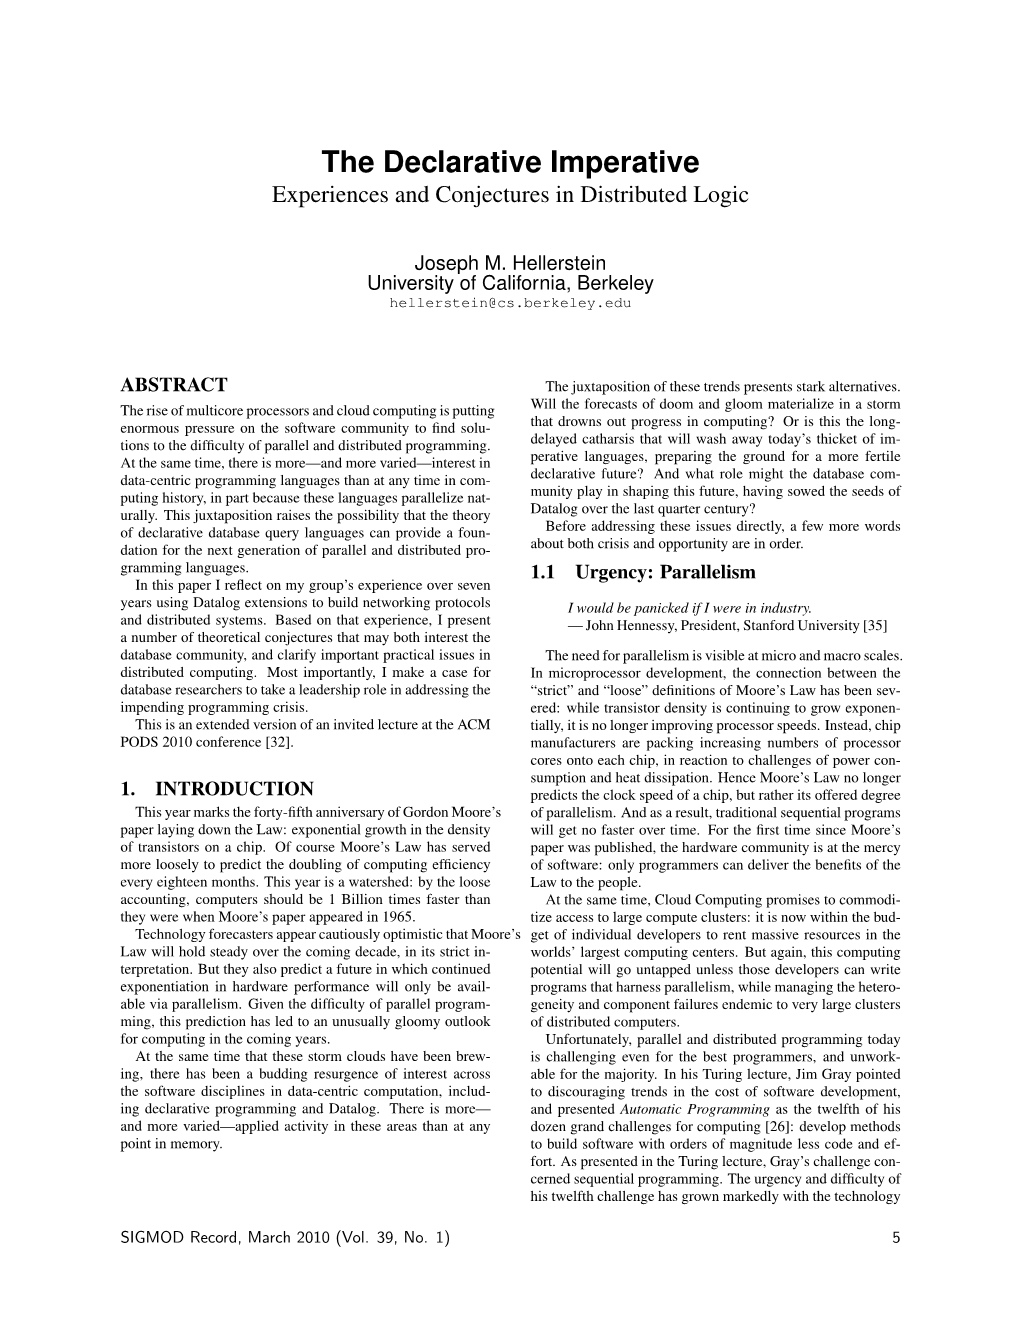 The Declarative Imperative Experiences and Conjectures in Distributed Logic